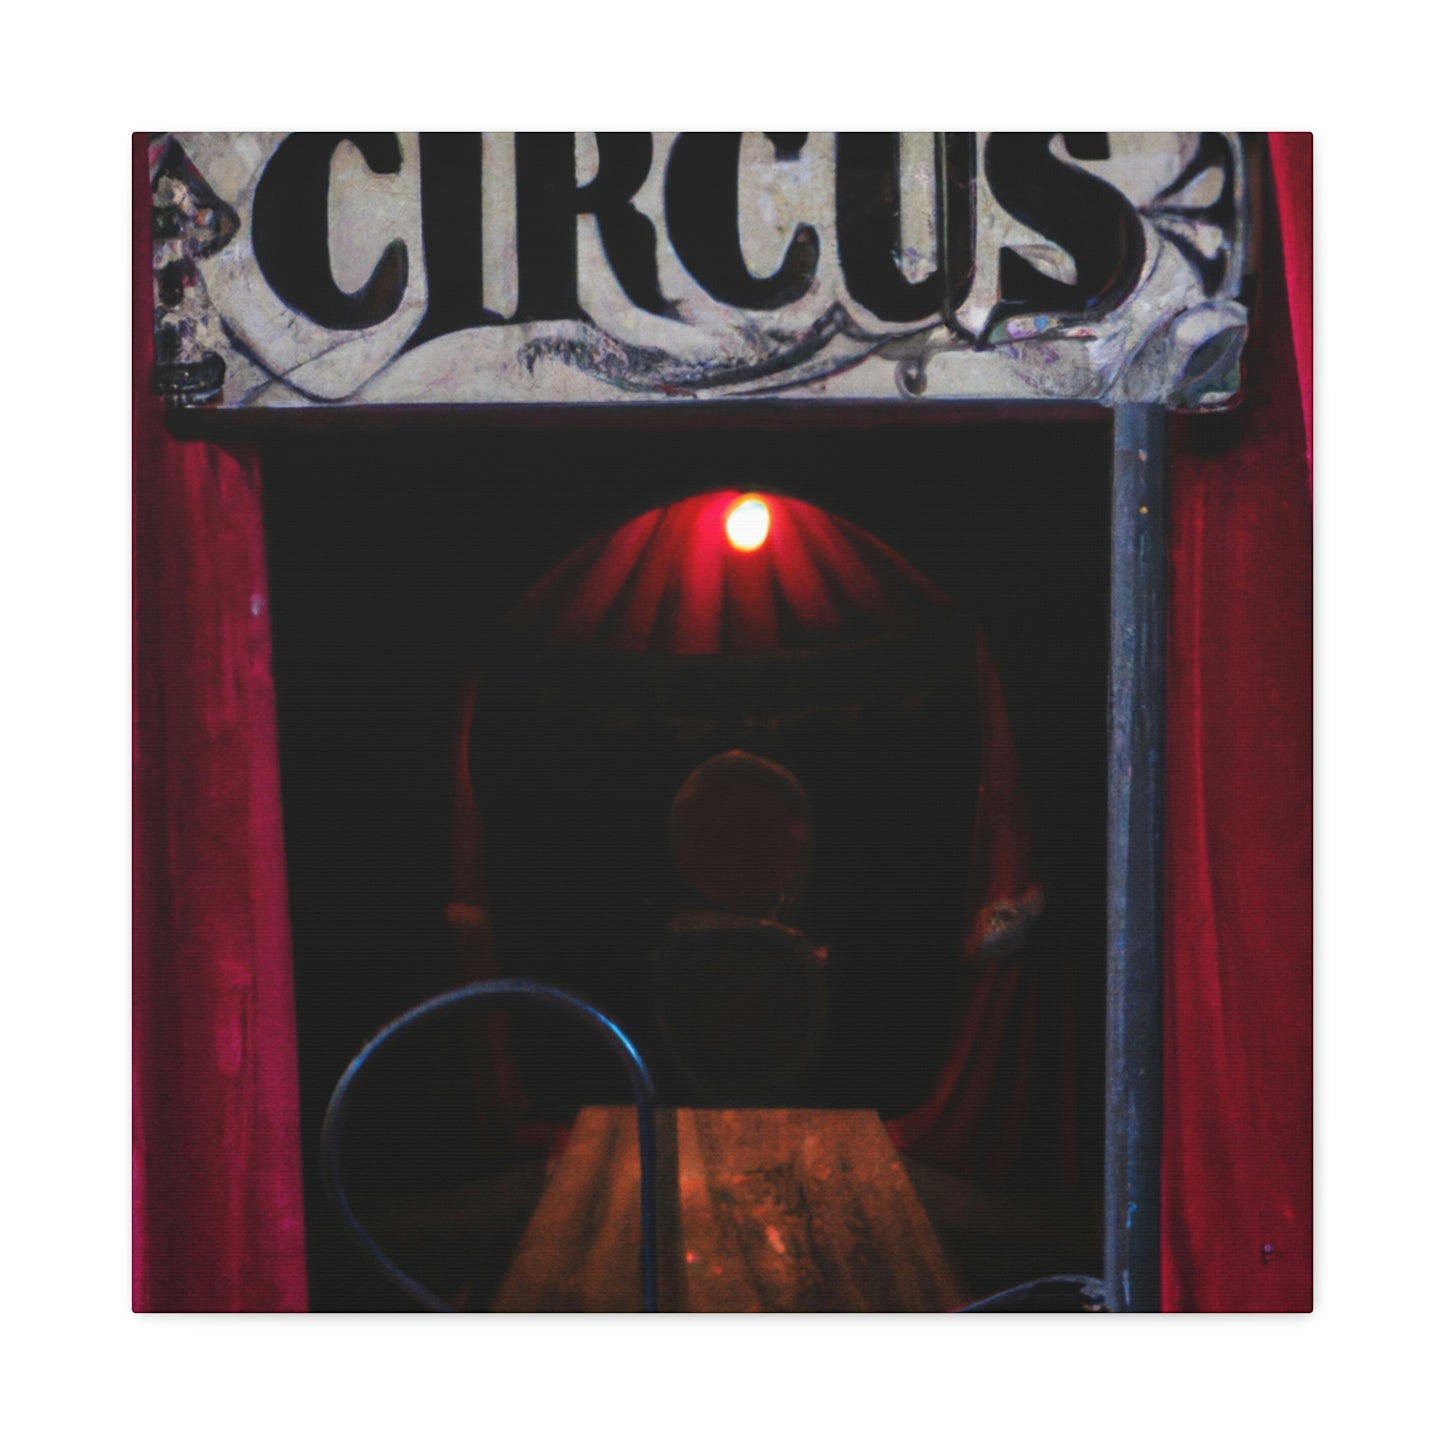 "The Mysterious Circus Key" - The Alien Canva